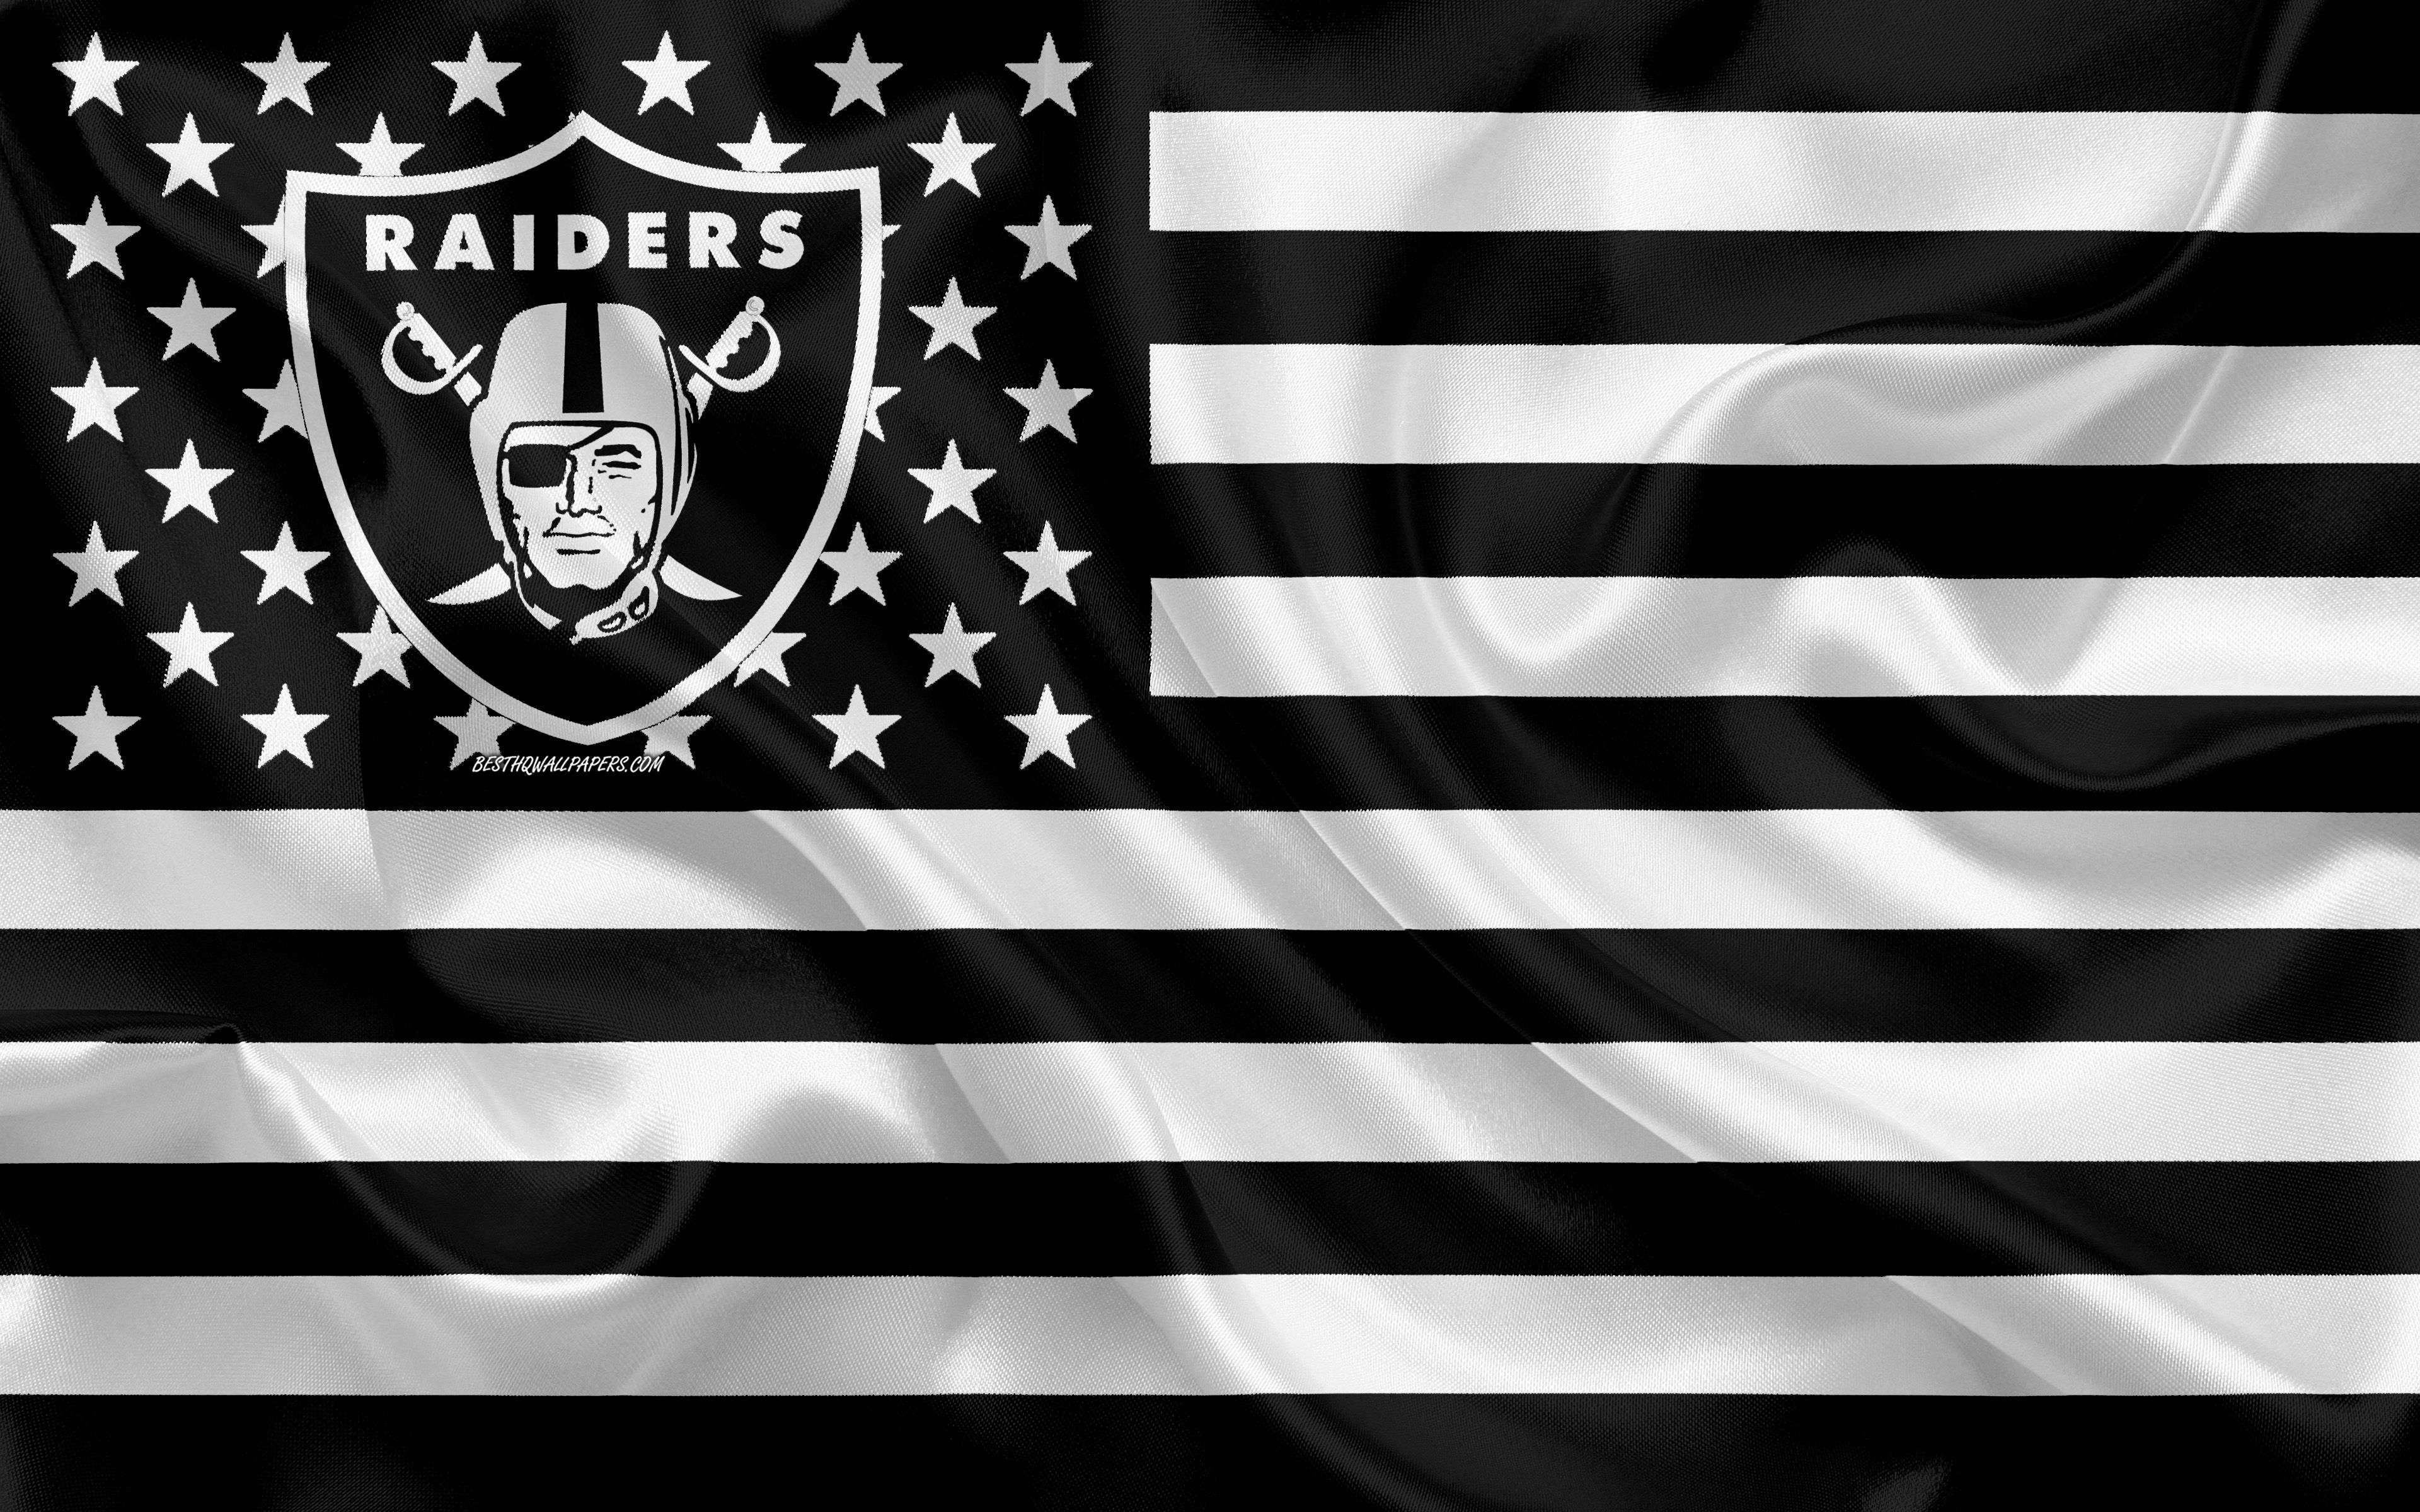 Download wallpaper Oakland Raiders, American football team, creative American flag, black and white flag, NFL, Oakland, California, USA, logo, emblem, silk flag, National Football League, American football for desktop with resolution 3840x2400